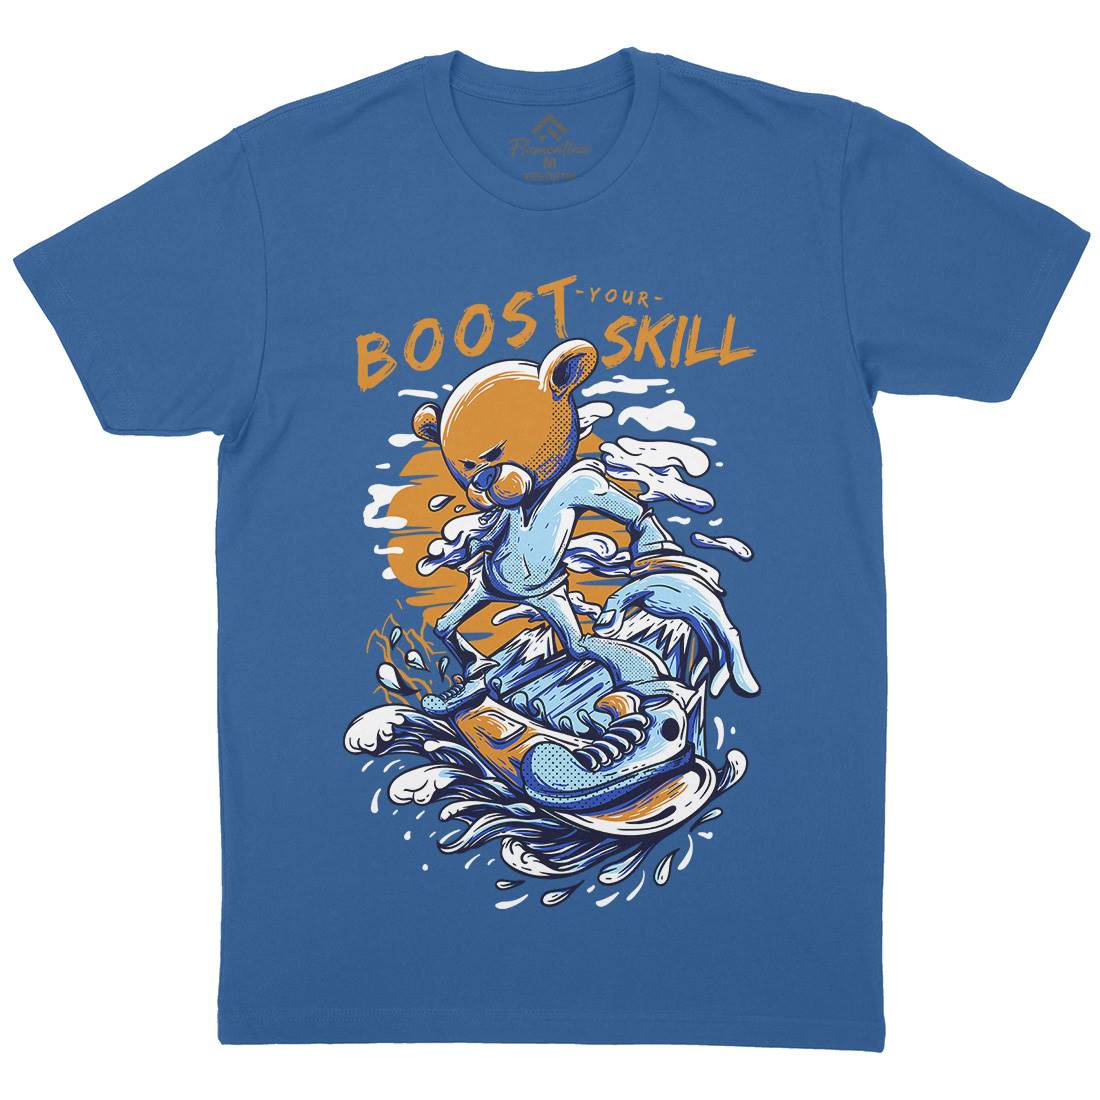 Boost Your Skill Mens Crew Neck T-Shirt Surf D716